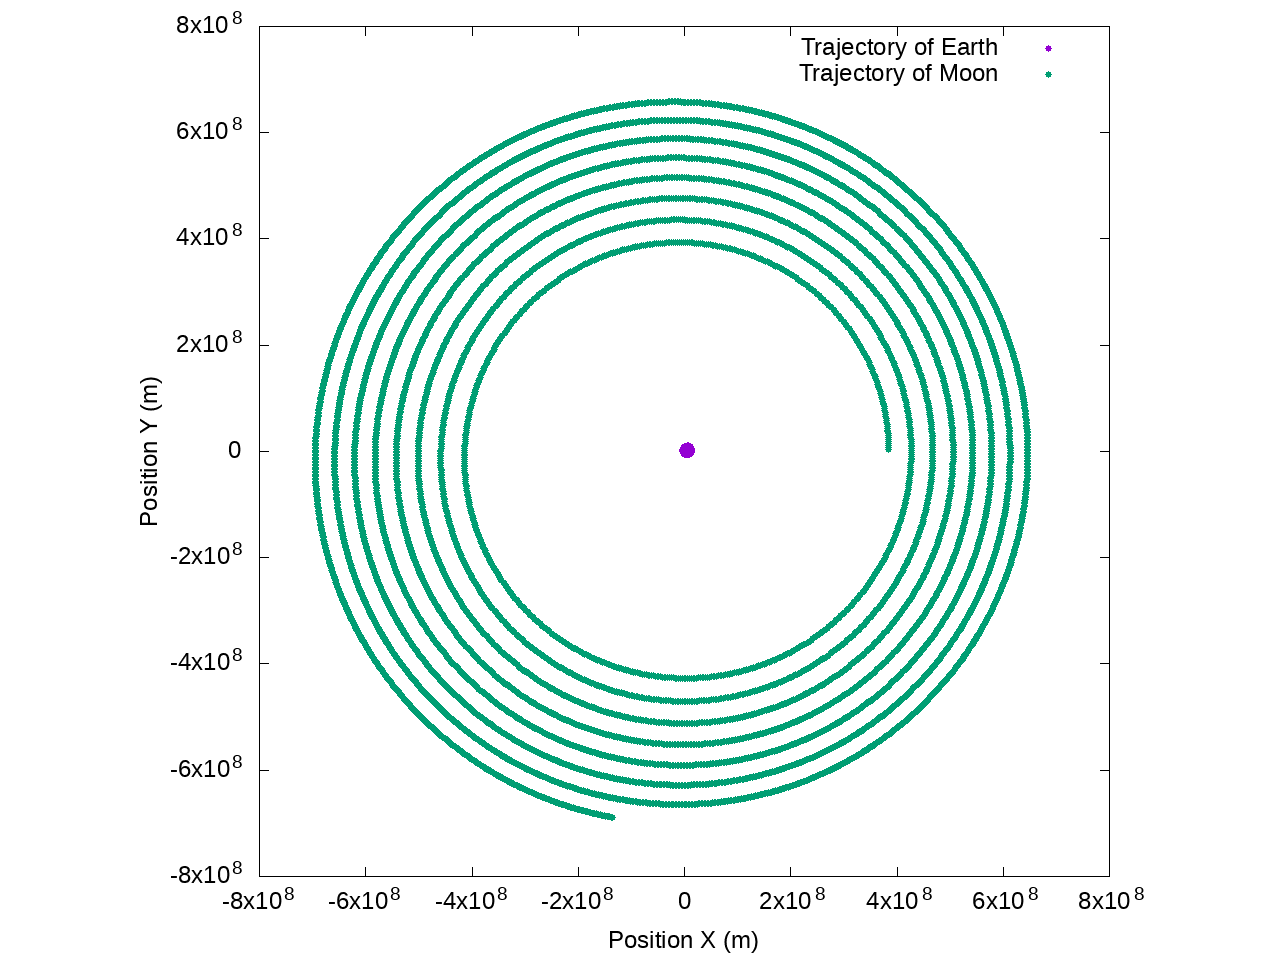 Trajectory of the Earth and the Moon with the naive Euler implementation